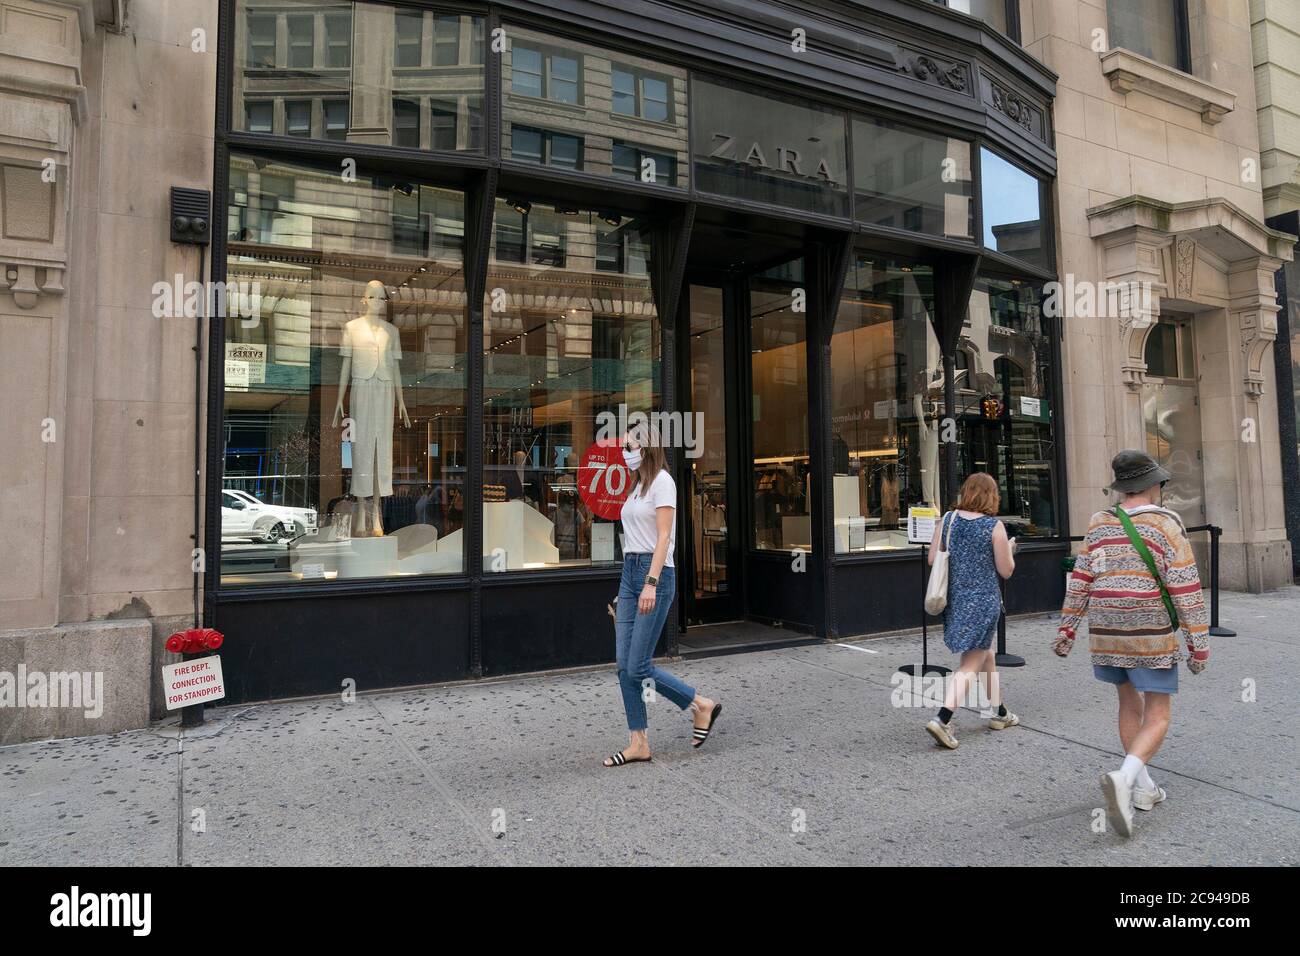 New York, United States. 28th July, 2020. Women walking by Zara store on  5th Avenue, Manhattan. Inditex, owner of brand plans to close more than  1000 stores around the world. Company announced